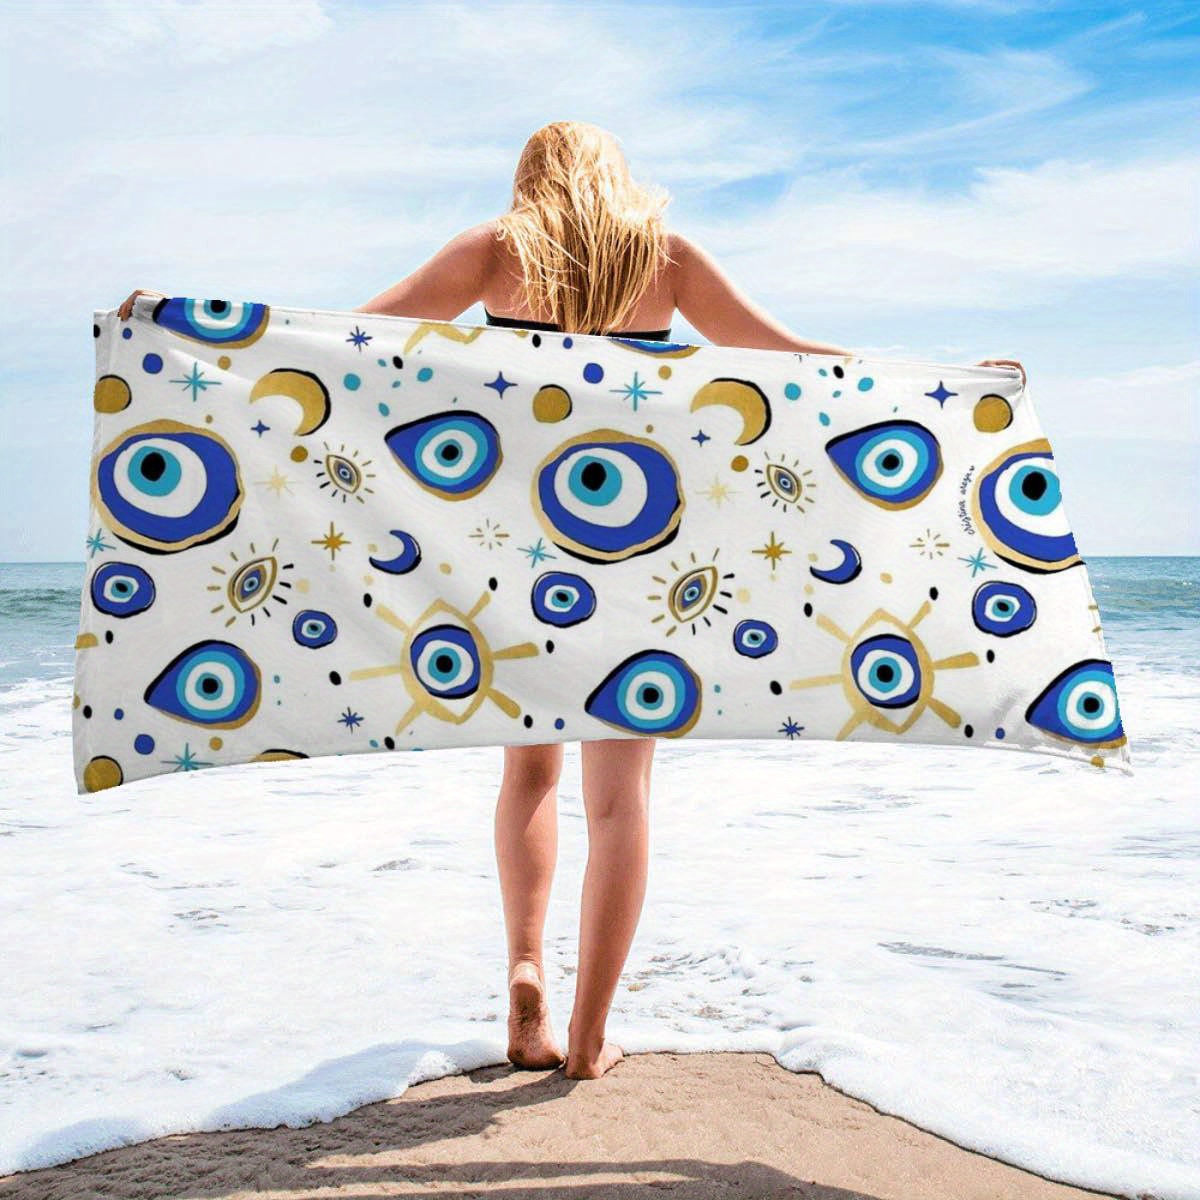 

1pc Moon & Star & Evil Eye Printed Beach Towel, Super Absorbent Swimming Towel, Comfortable Beach Towel, Fashionable Pool Towel, Beach Accessories, Holiday Essential Gift